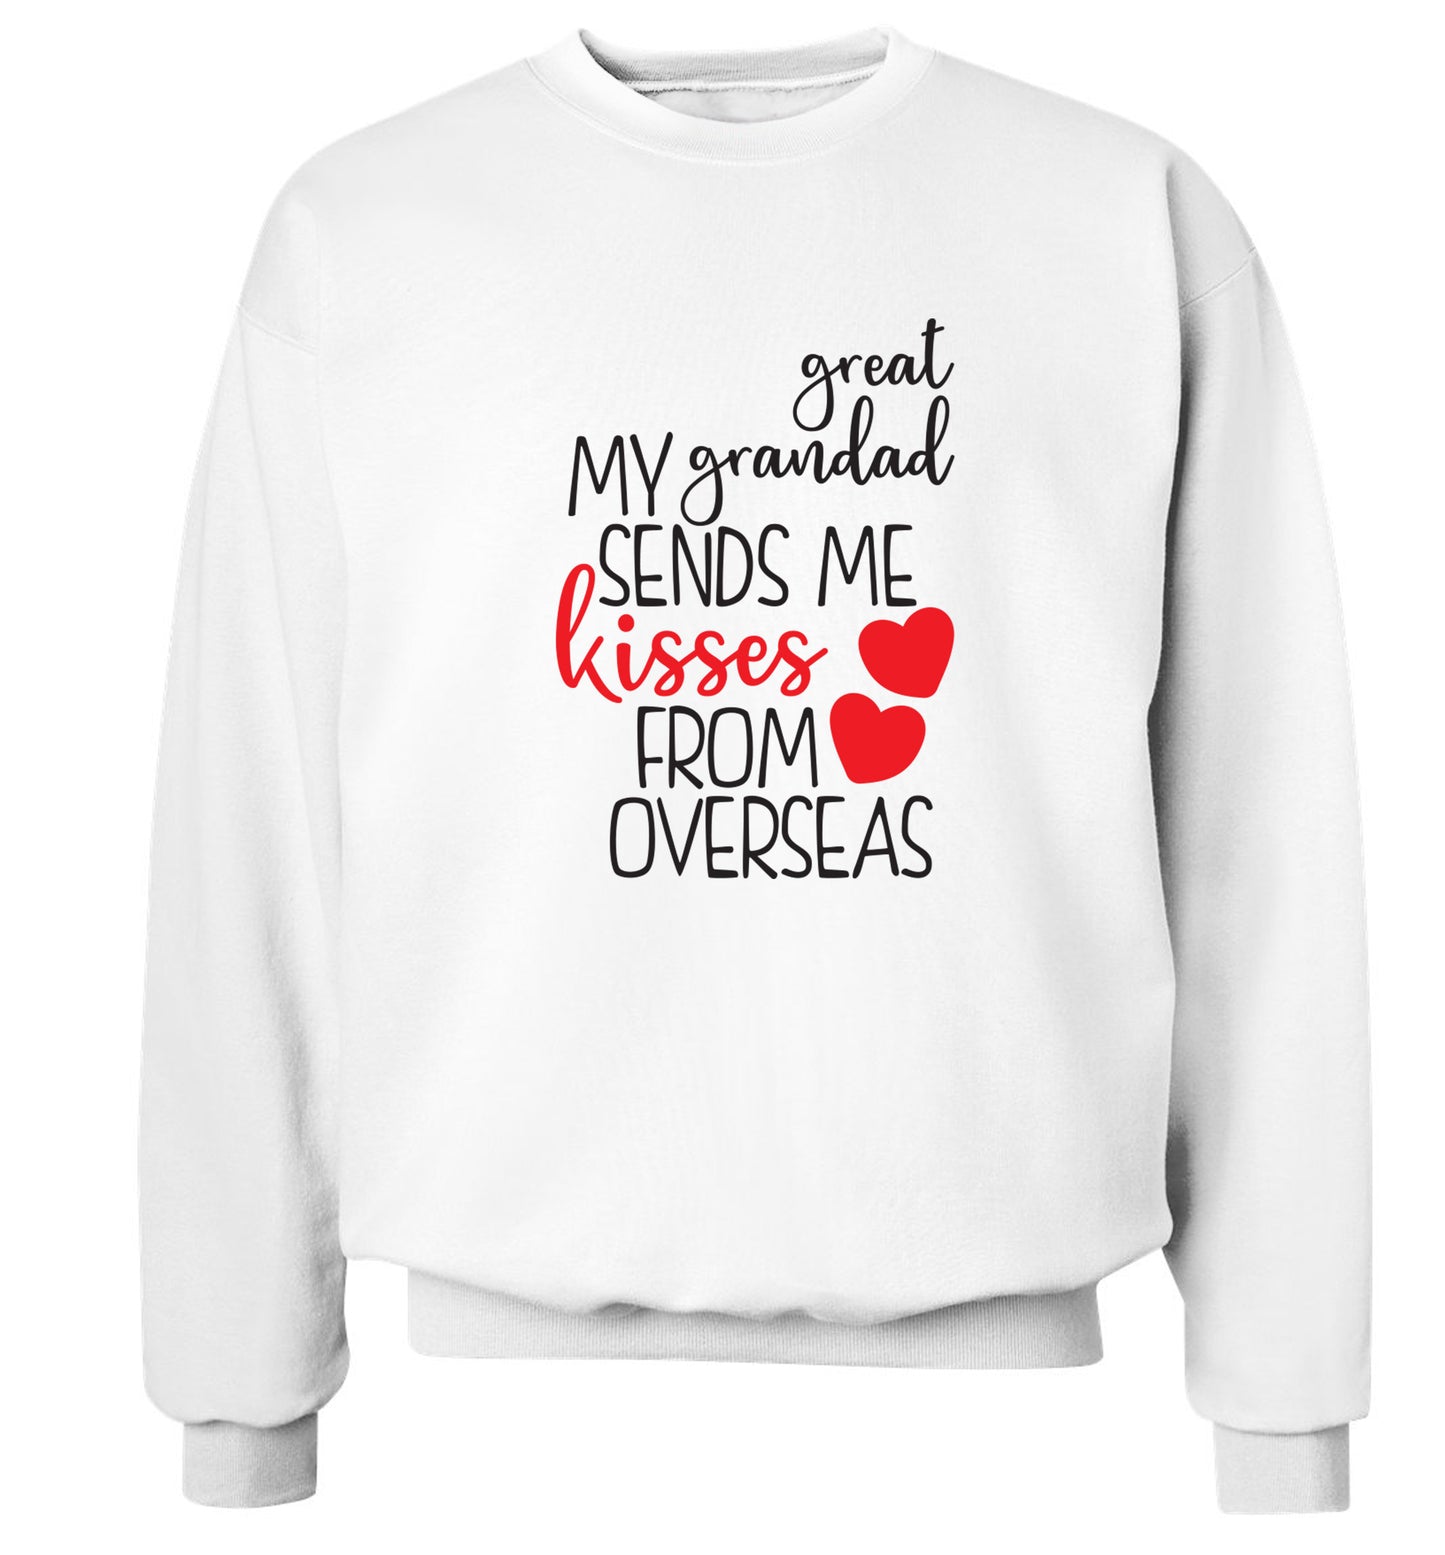 My great grandad sends me kisses from overseas Adult's unisex white Sweater 2XL